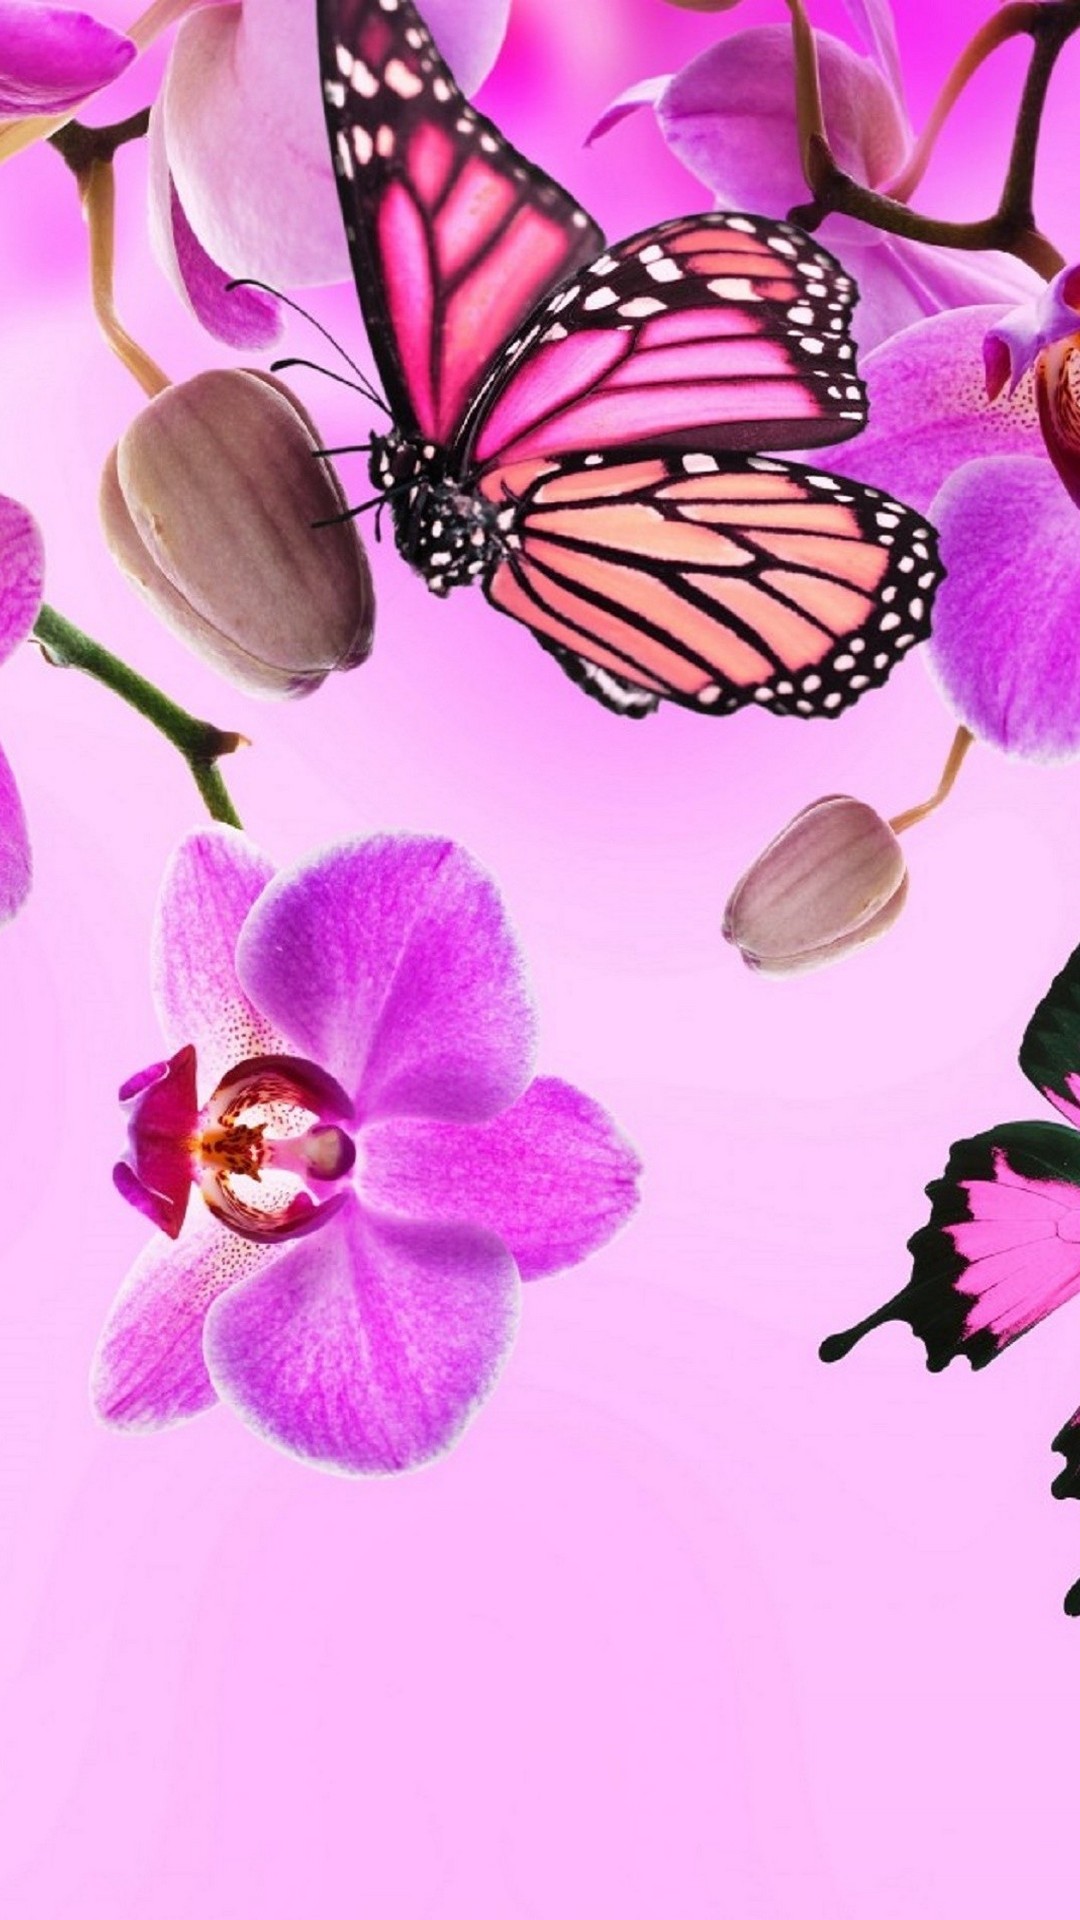 Pink Butterfly Wallpaper Android with HD resolution 1080x1920